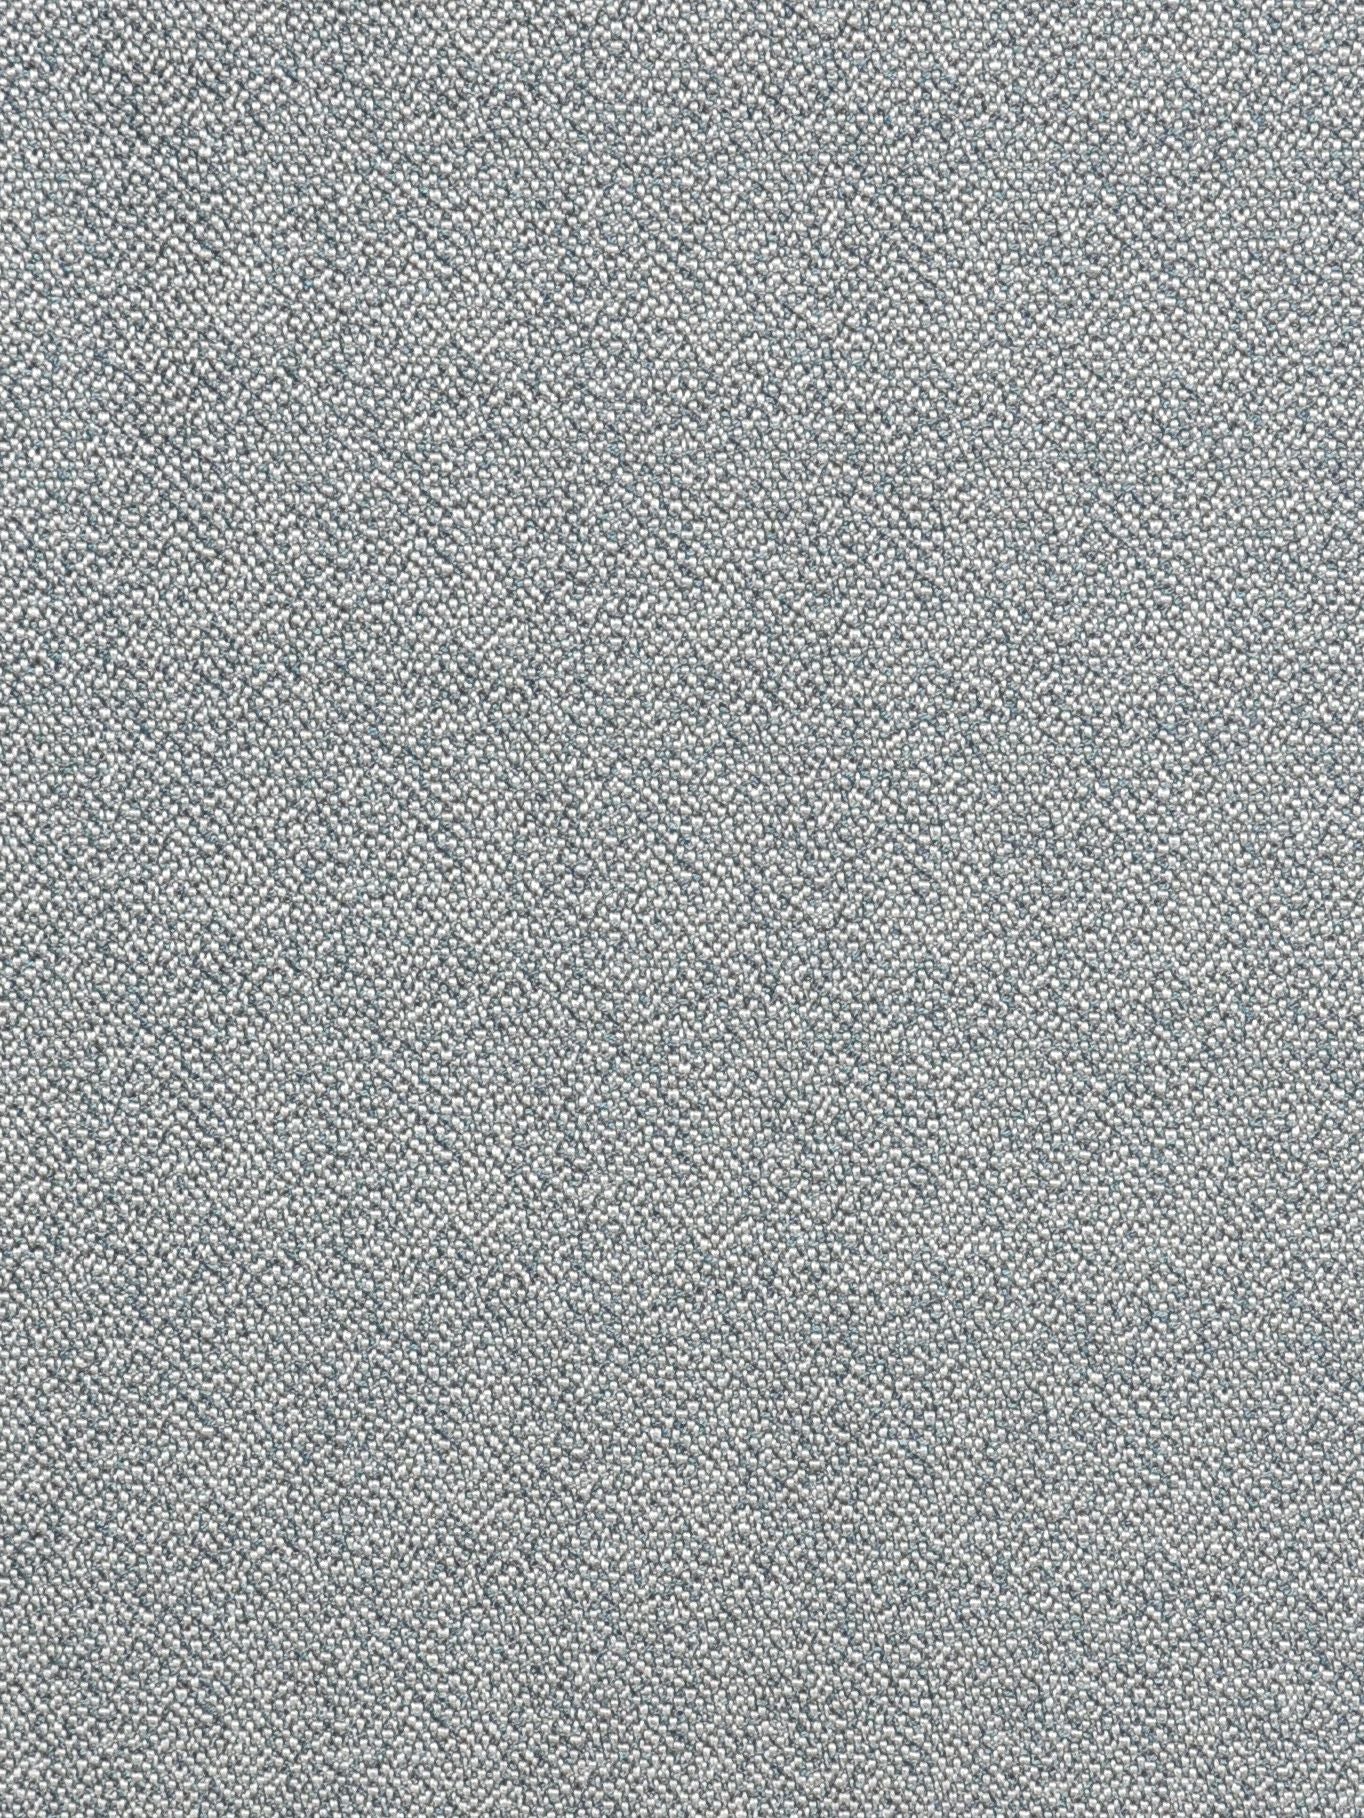 Pebble Texture fabric in bluestone color - pattern number SC 000327139 - by Scalamandre in the Scalamandre Fabrics Book 1 collection